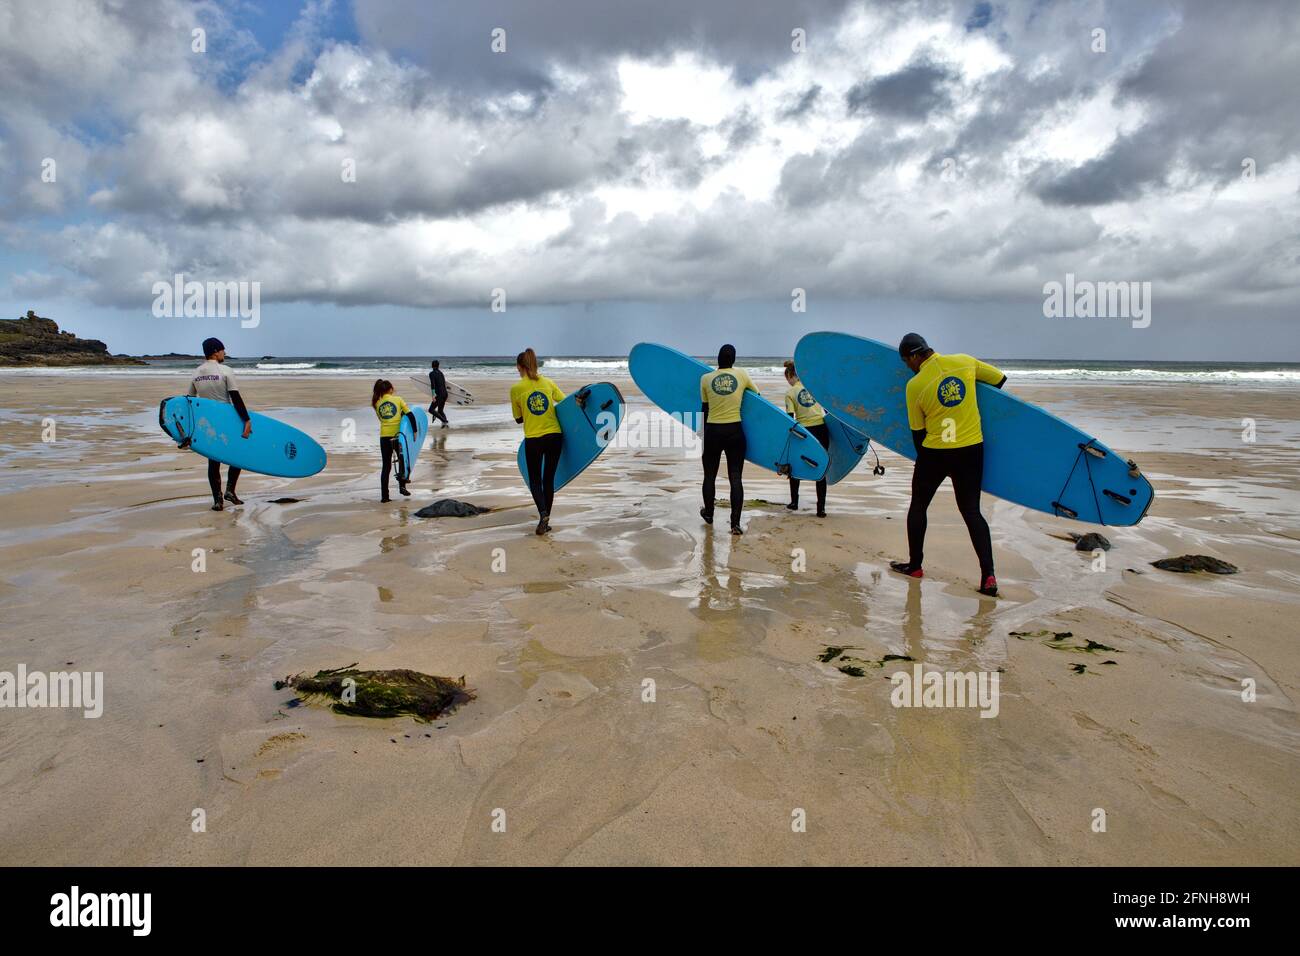 surfers carrying blue boards and wearing yellow rash vests and wet suits walking towards the sea along a flat expanse of wet sand on a cloudy morning Stock Photo